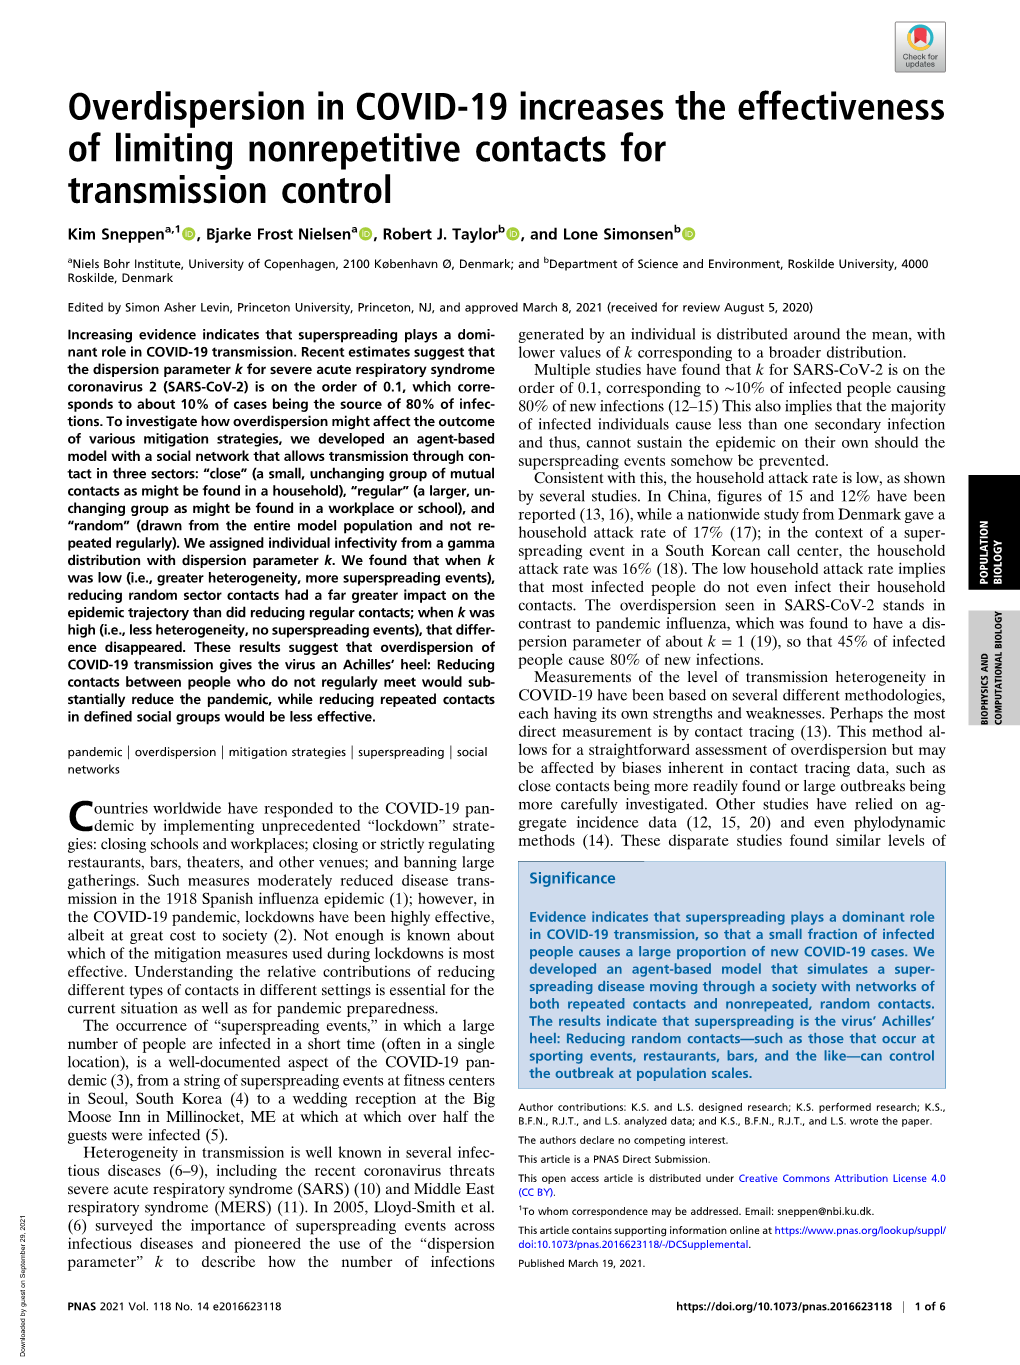 Overdispersion in COVID-19 Increases the Effectiveness of Limiting Nonrepetitive Contacts for Transmission Control